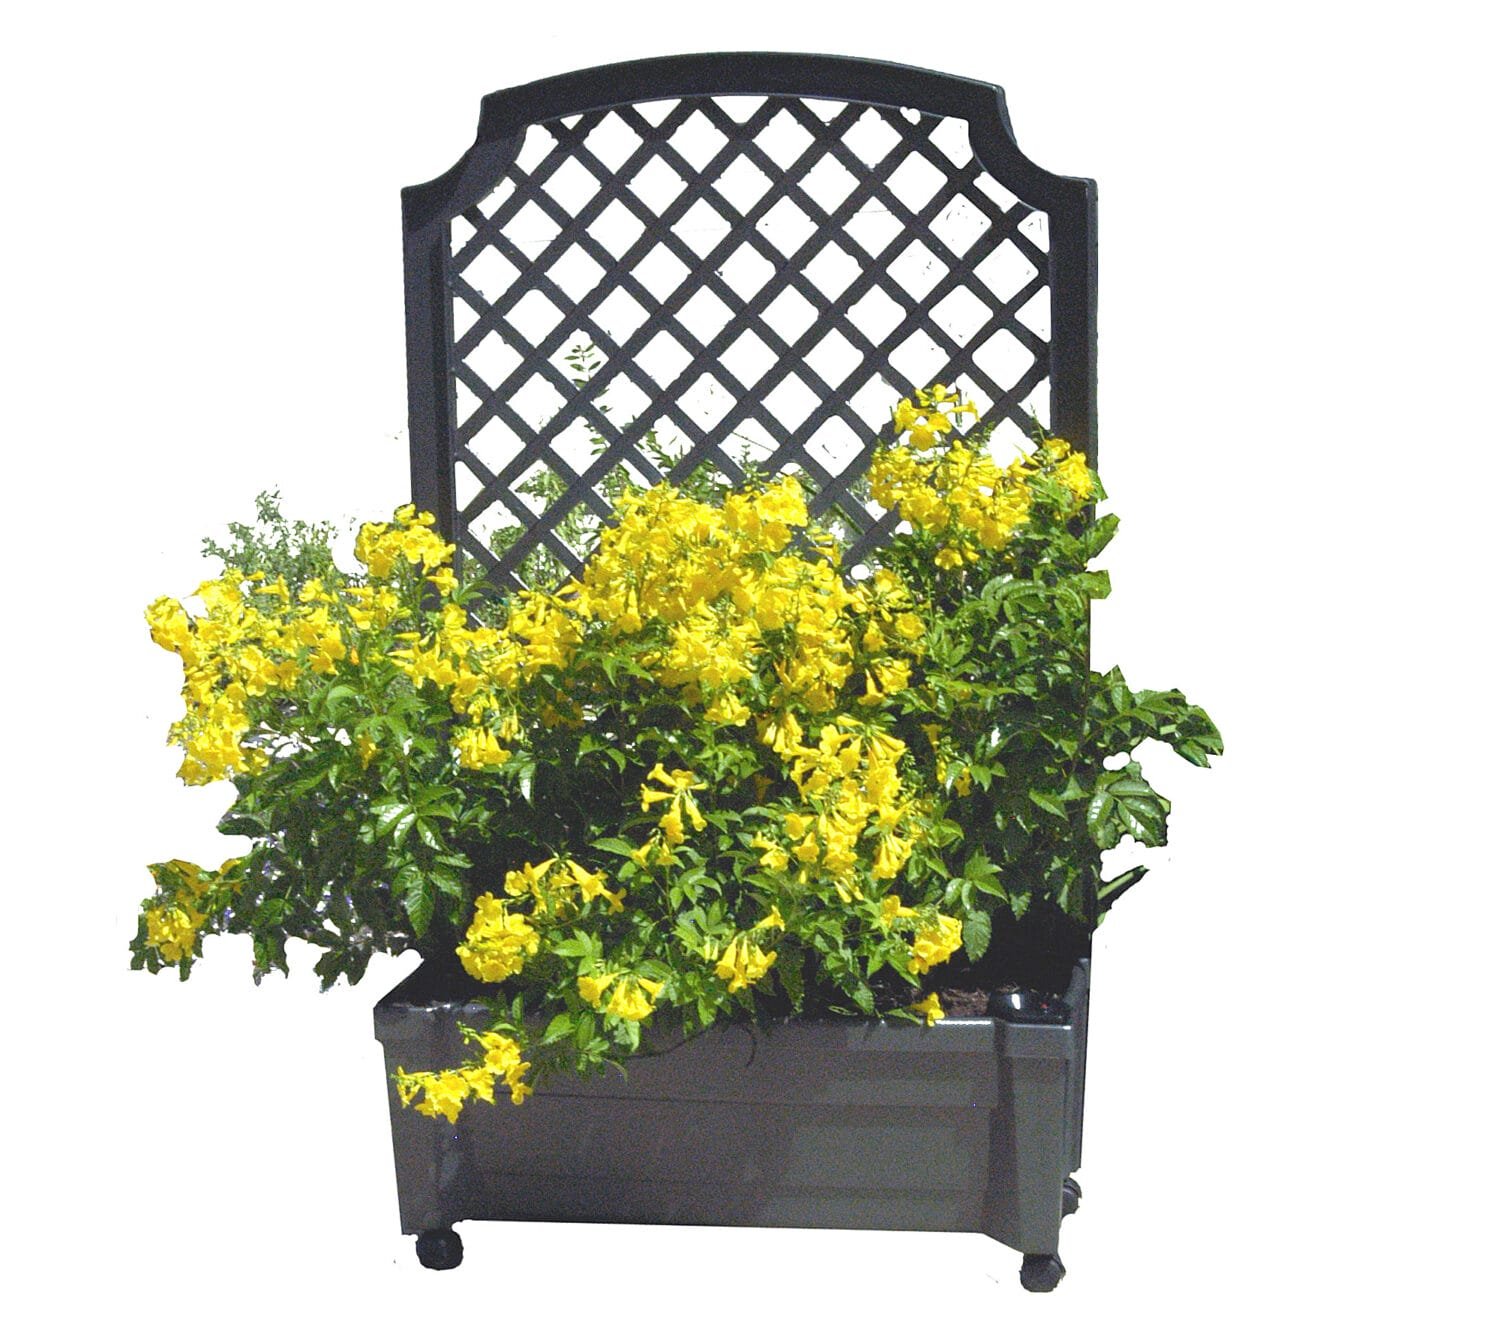 Calypso Planter with Trellis and Water Reservoirer12